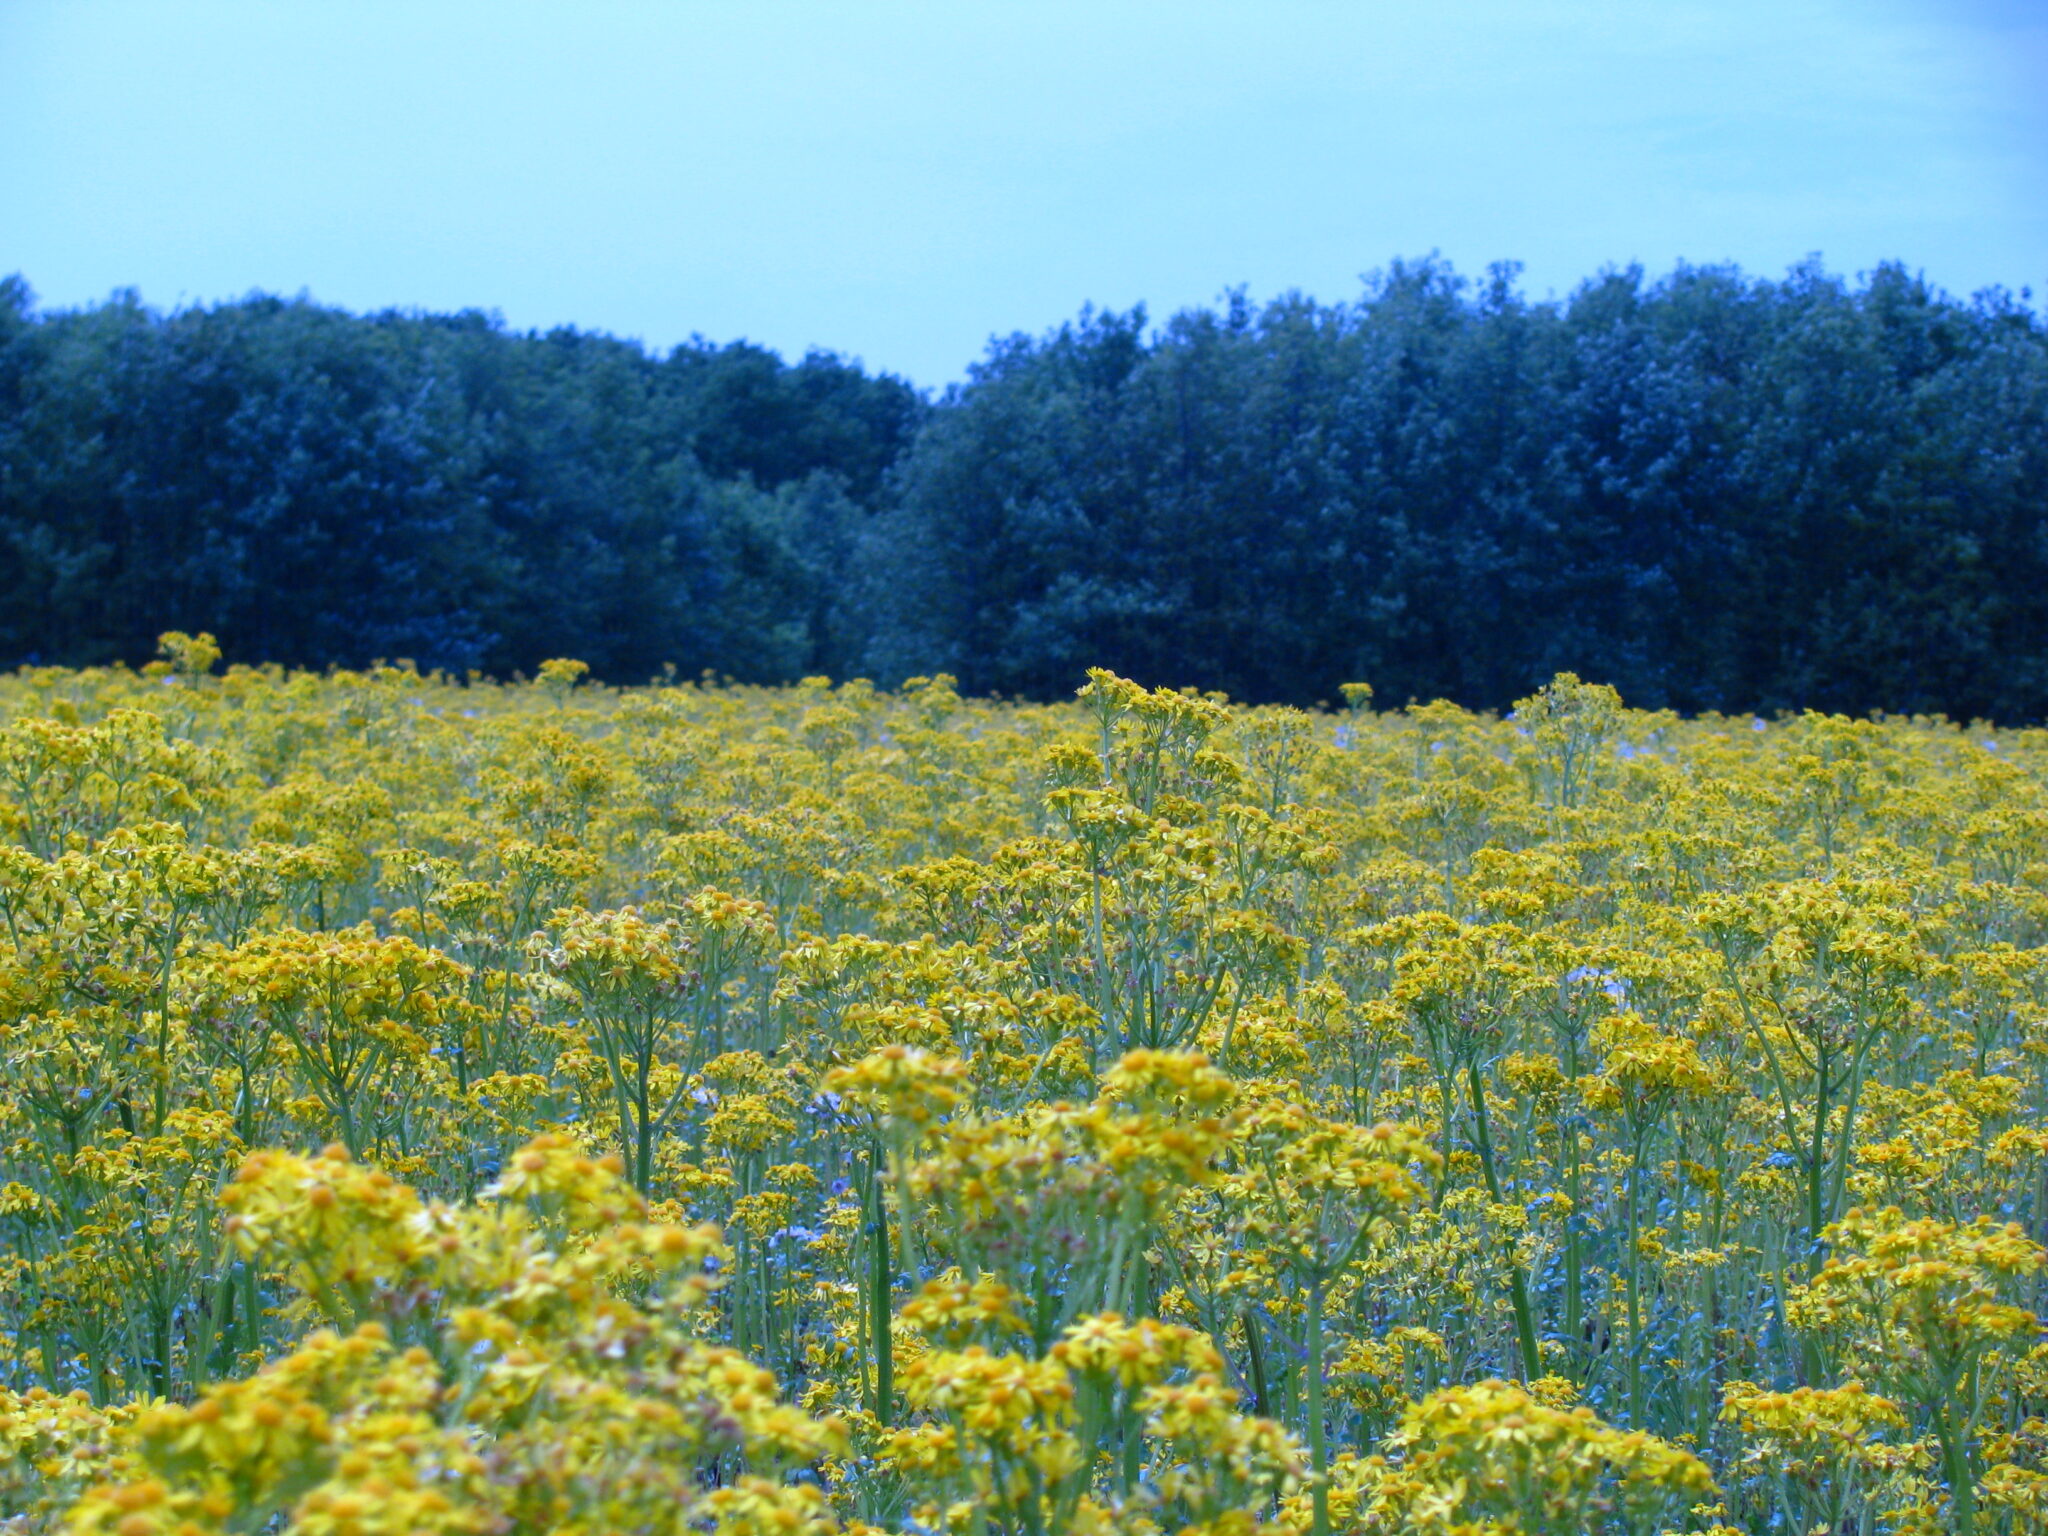 Figure 2. Field infested with cressleaf groundsel at the SEPAC farm (Photo: Glenn Nice).